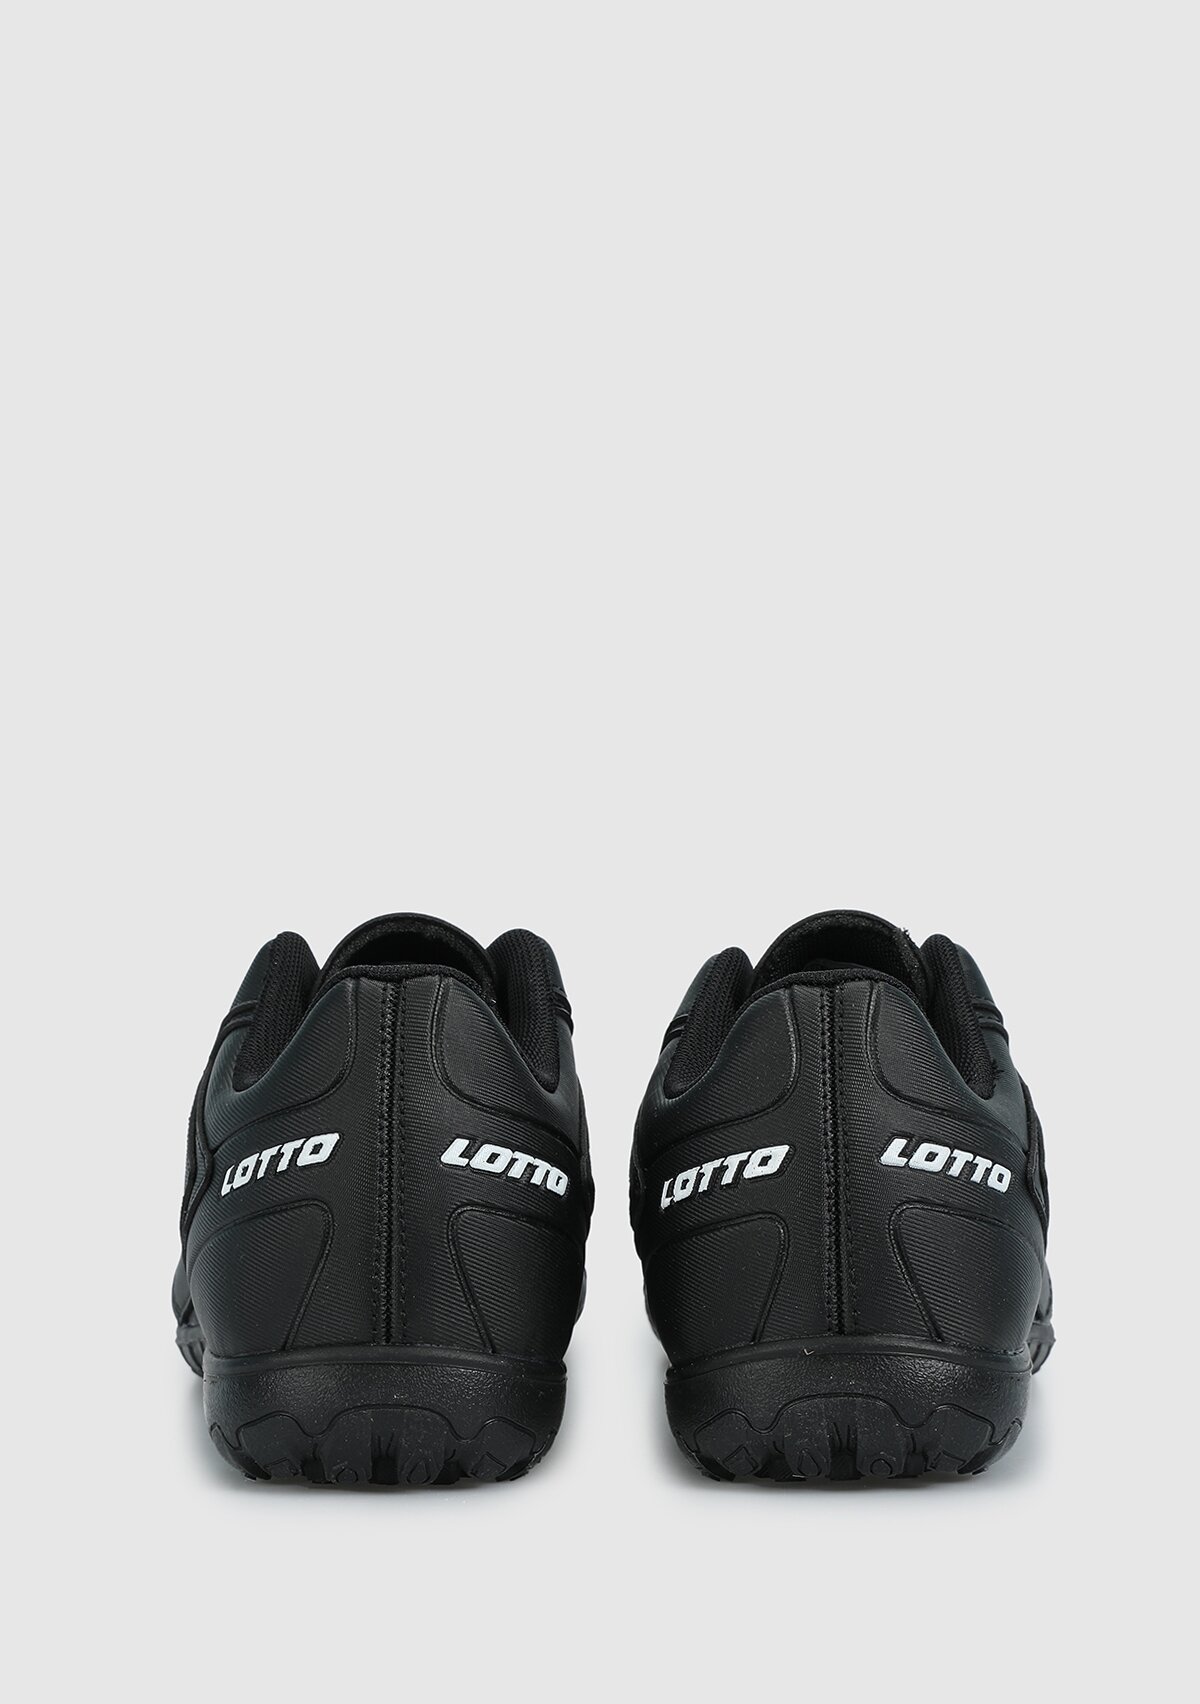 Lotto UNISEX LOTTO 3W RATRON TF GR 3PR,SIYAH,YESIL SHOES